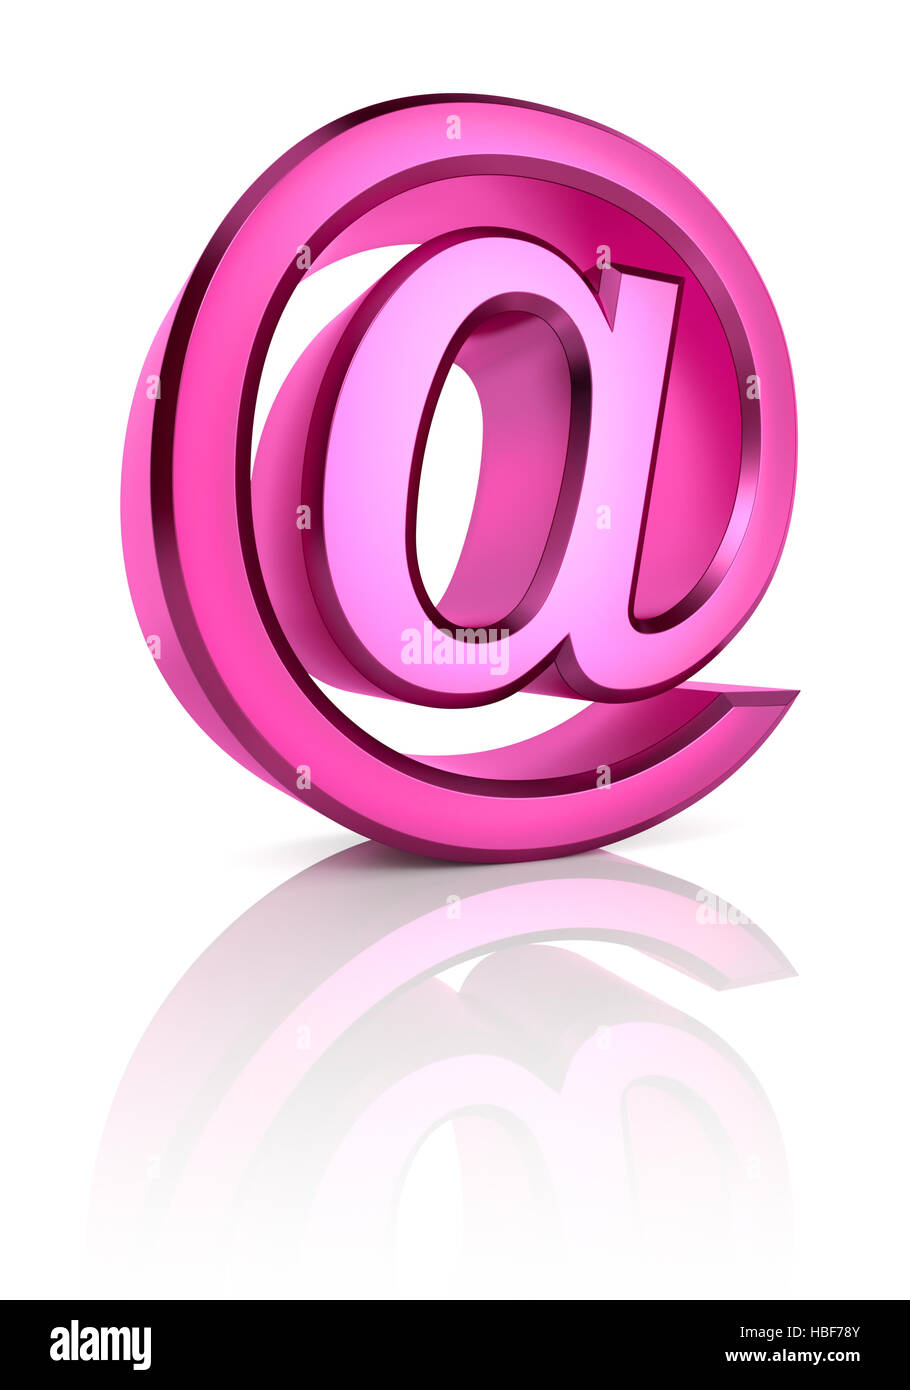 Pink Email Symbol Stock Photo